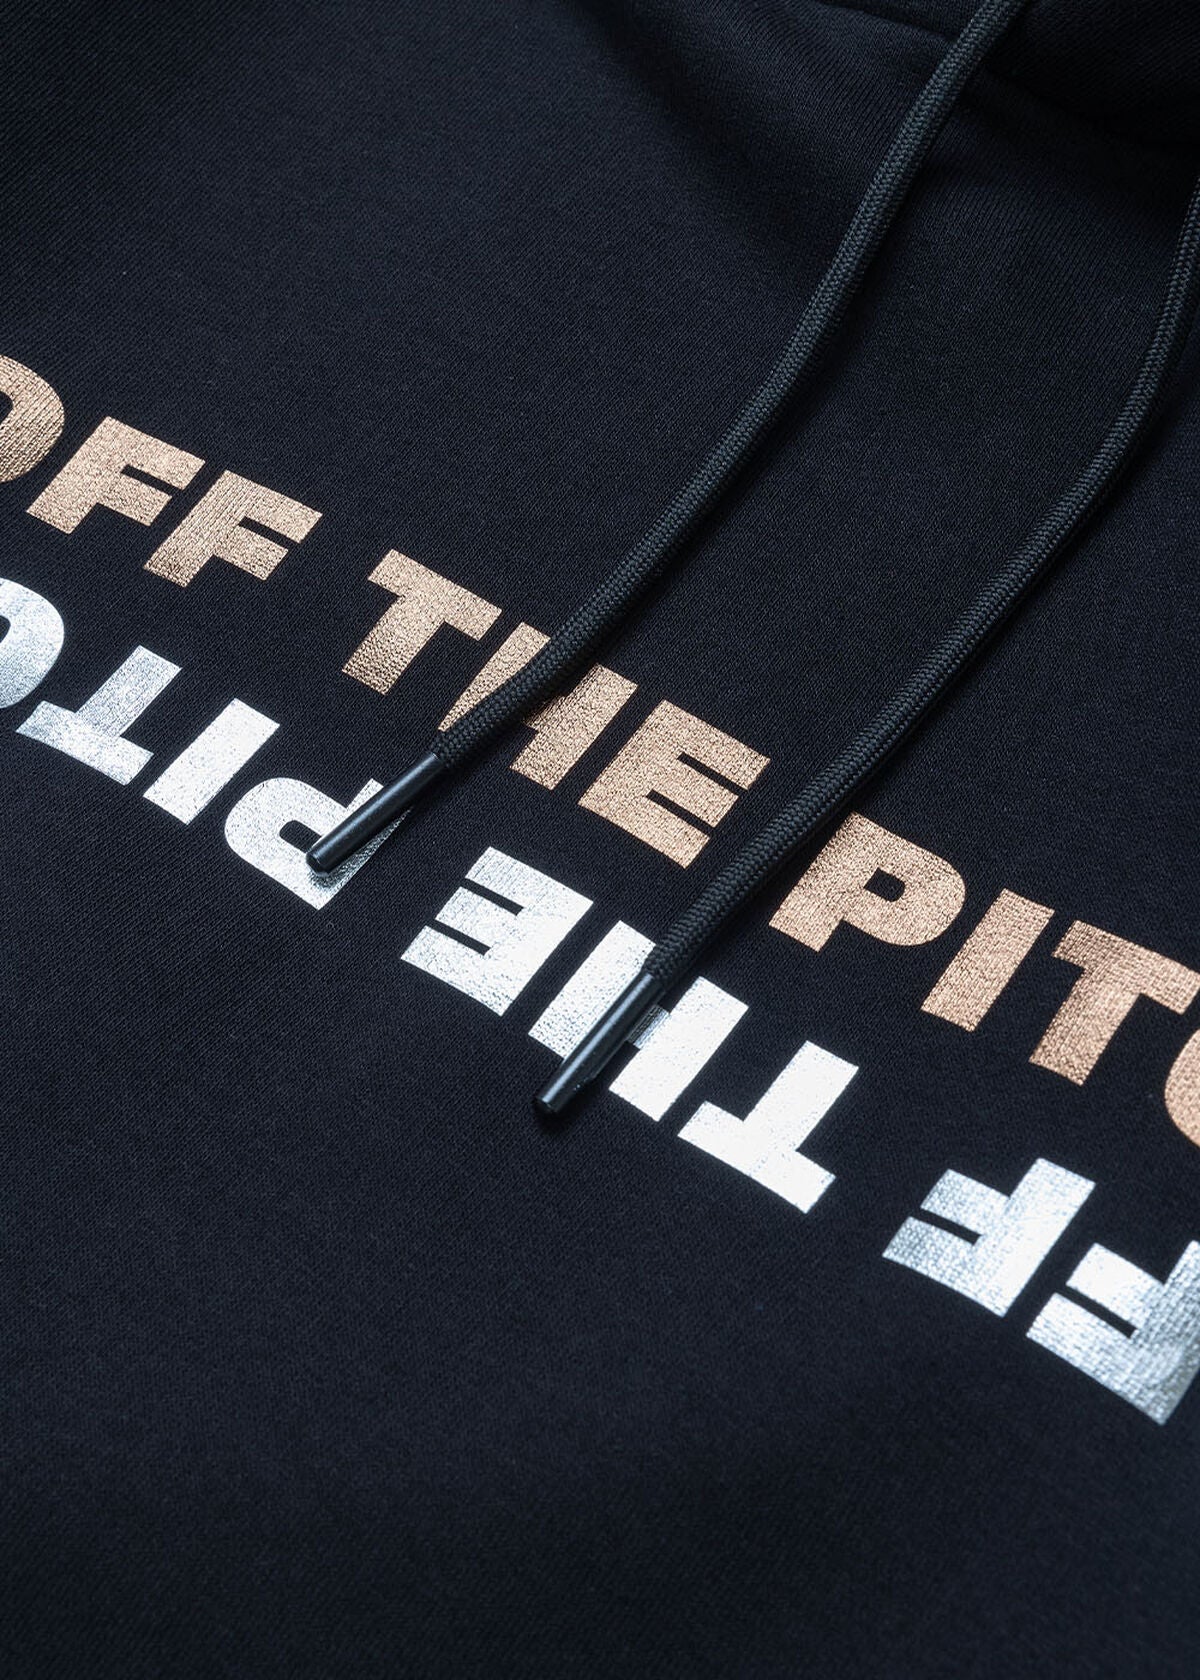 Off The Pitch Blackfriday Revel Hoodie